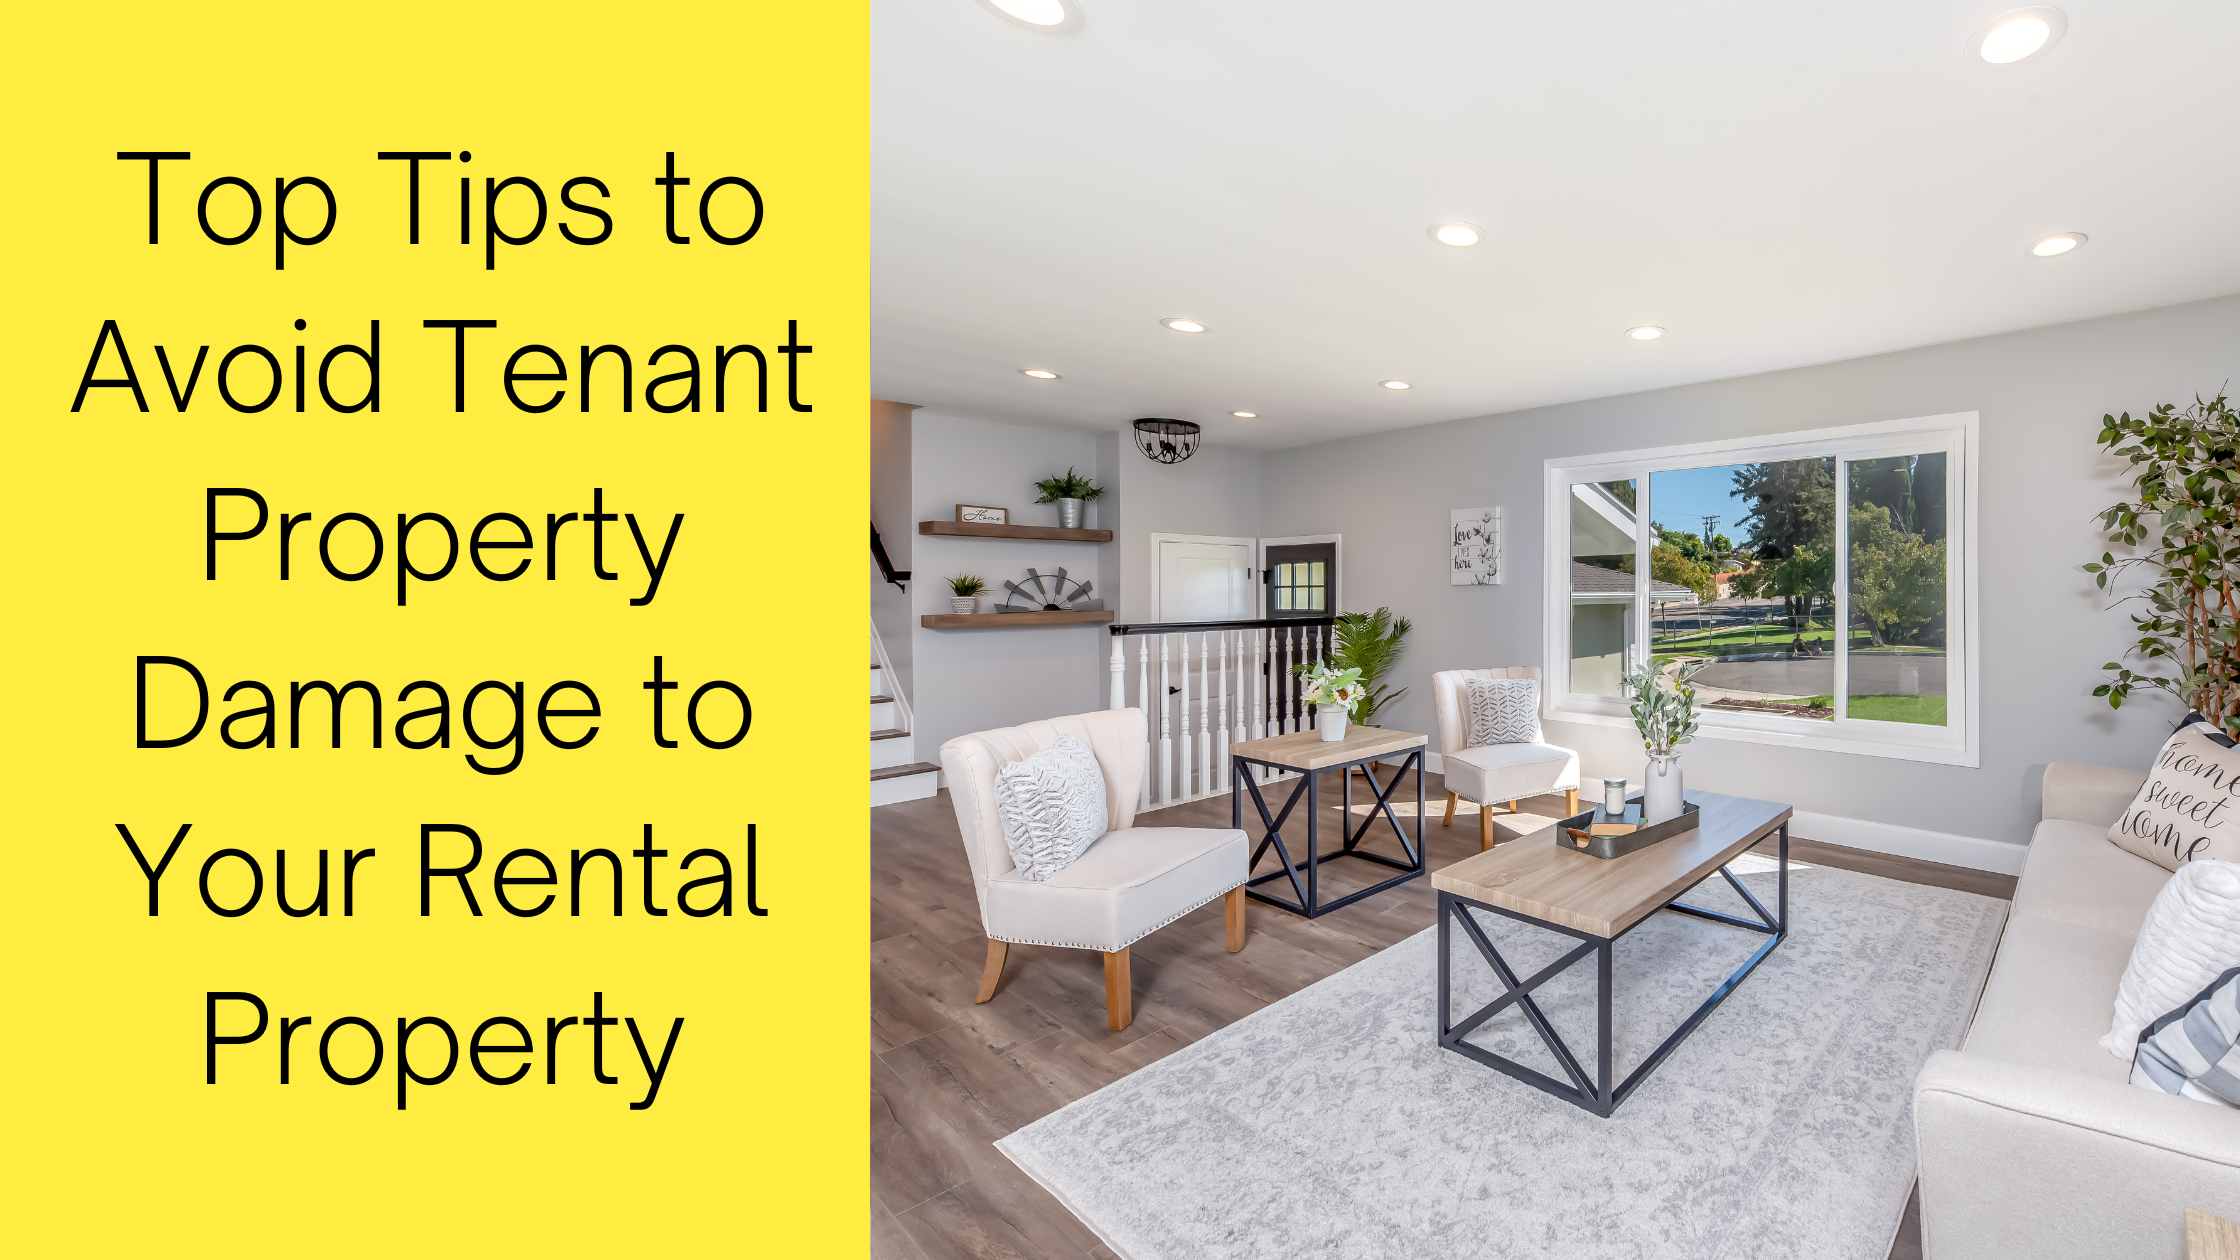 Top Tips to Avoid Tenant Damage to Your Rental Property